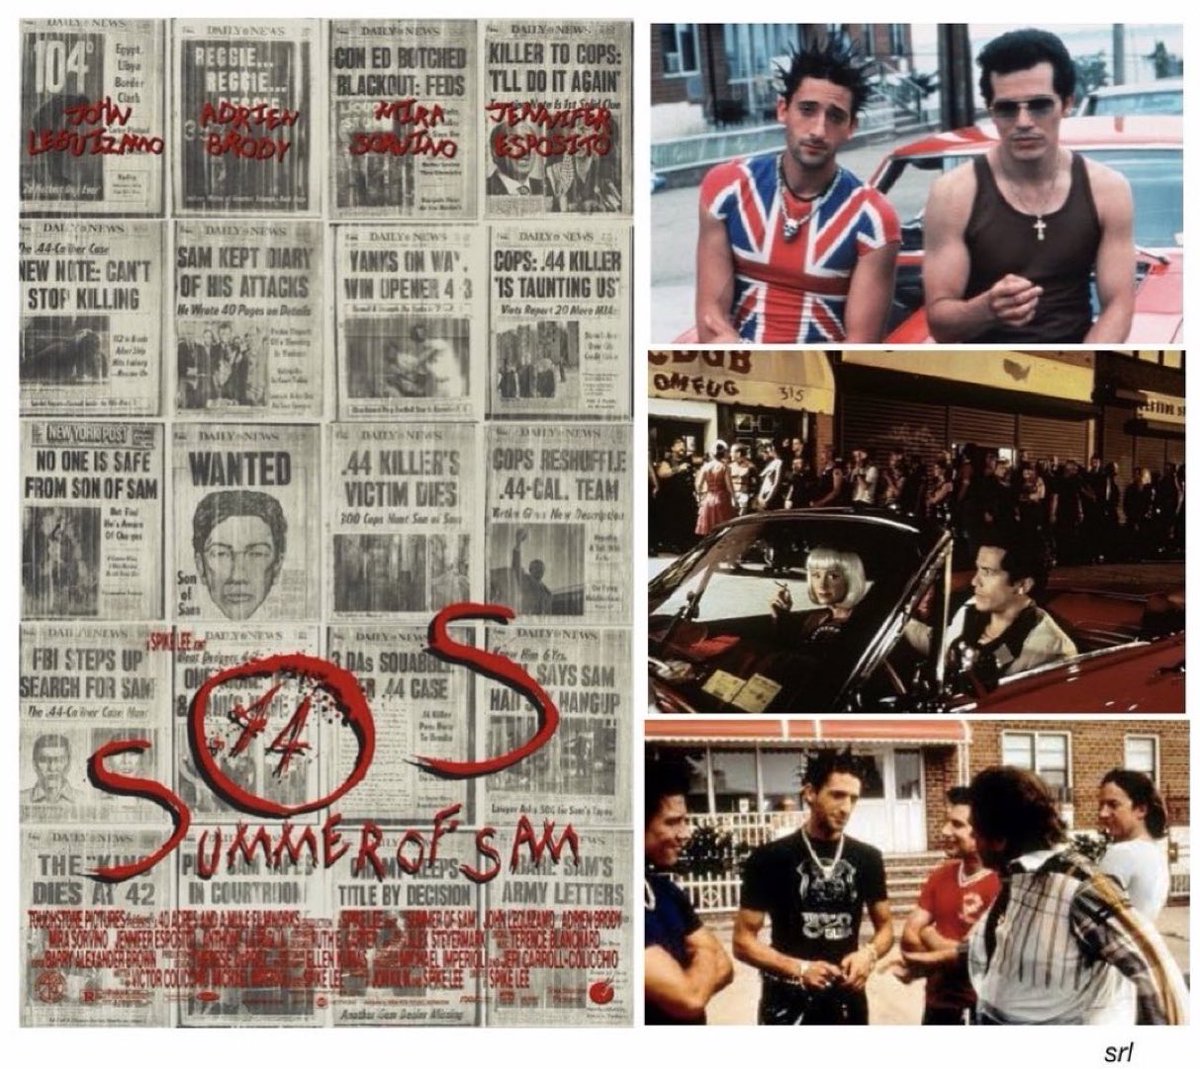 9pm TODAY on #GreatMovies

The 1999 film🎥 “Summer of Sam” directed by #SpikeLee from a screenplay by Victor Colicchio, Michael Imperioli & Spike Lee and based on a story by Spike Lee

🌟#JohnLeguizamo #AdrienBrody #MiraSorvino #JenniferEsposito #AnthonyLaPaglia